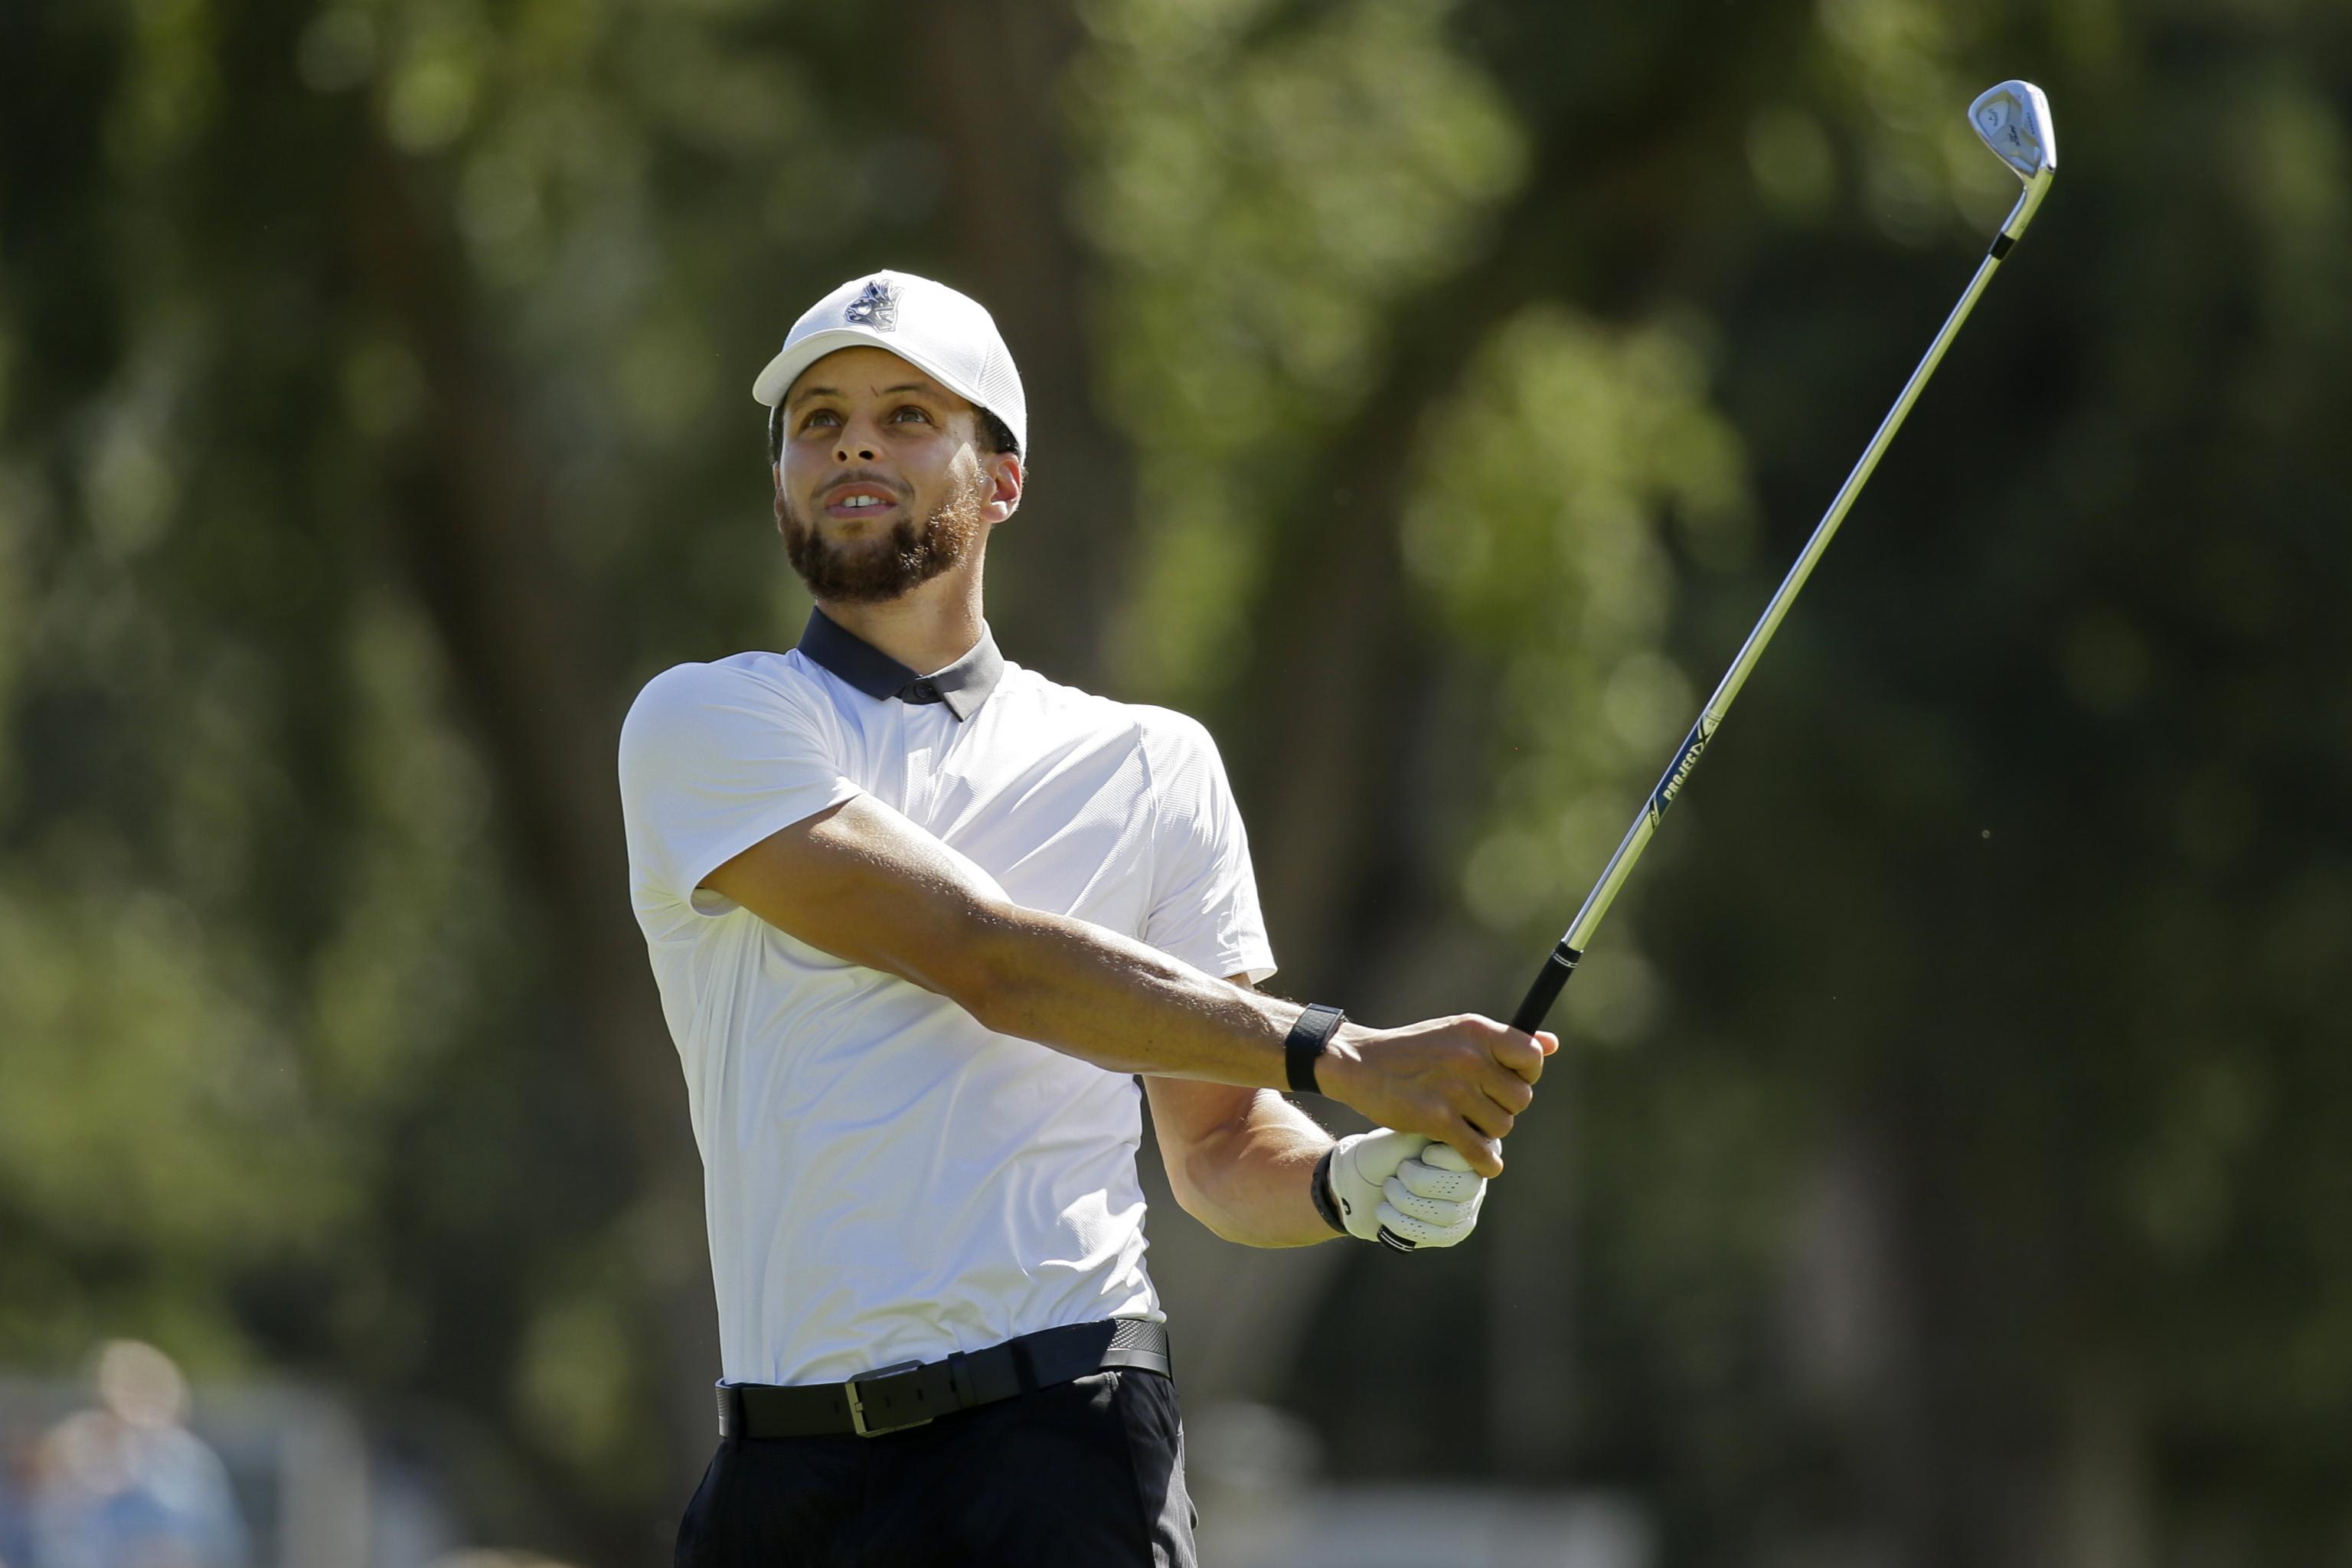 Stephen Curry sticks it to haters with another solid pro golf showing